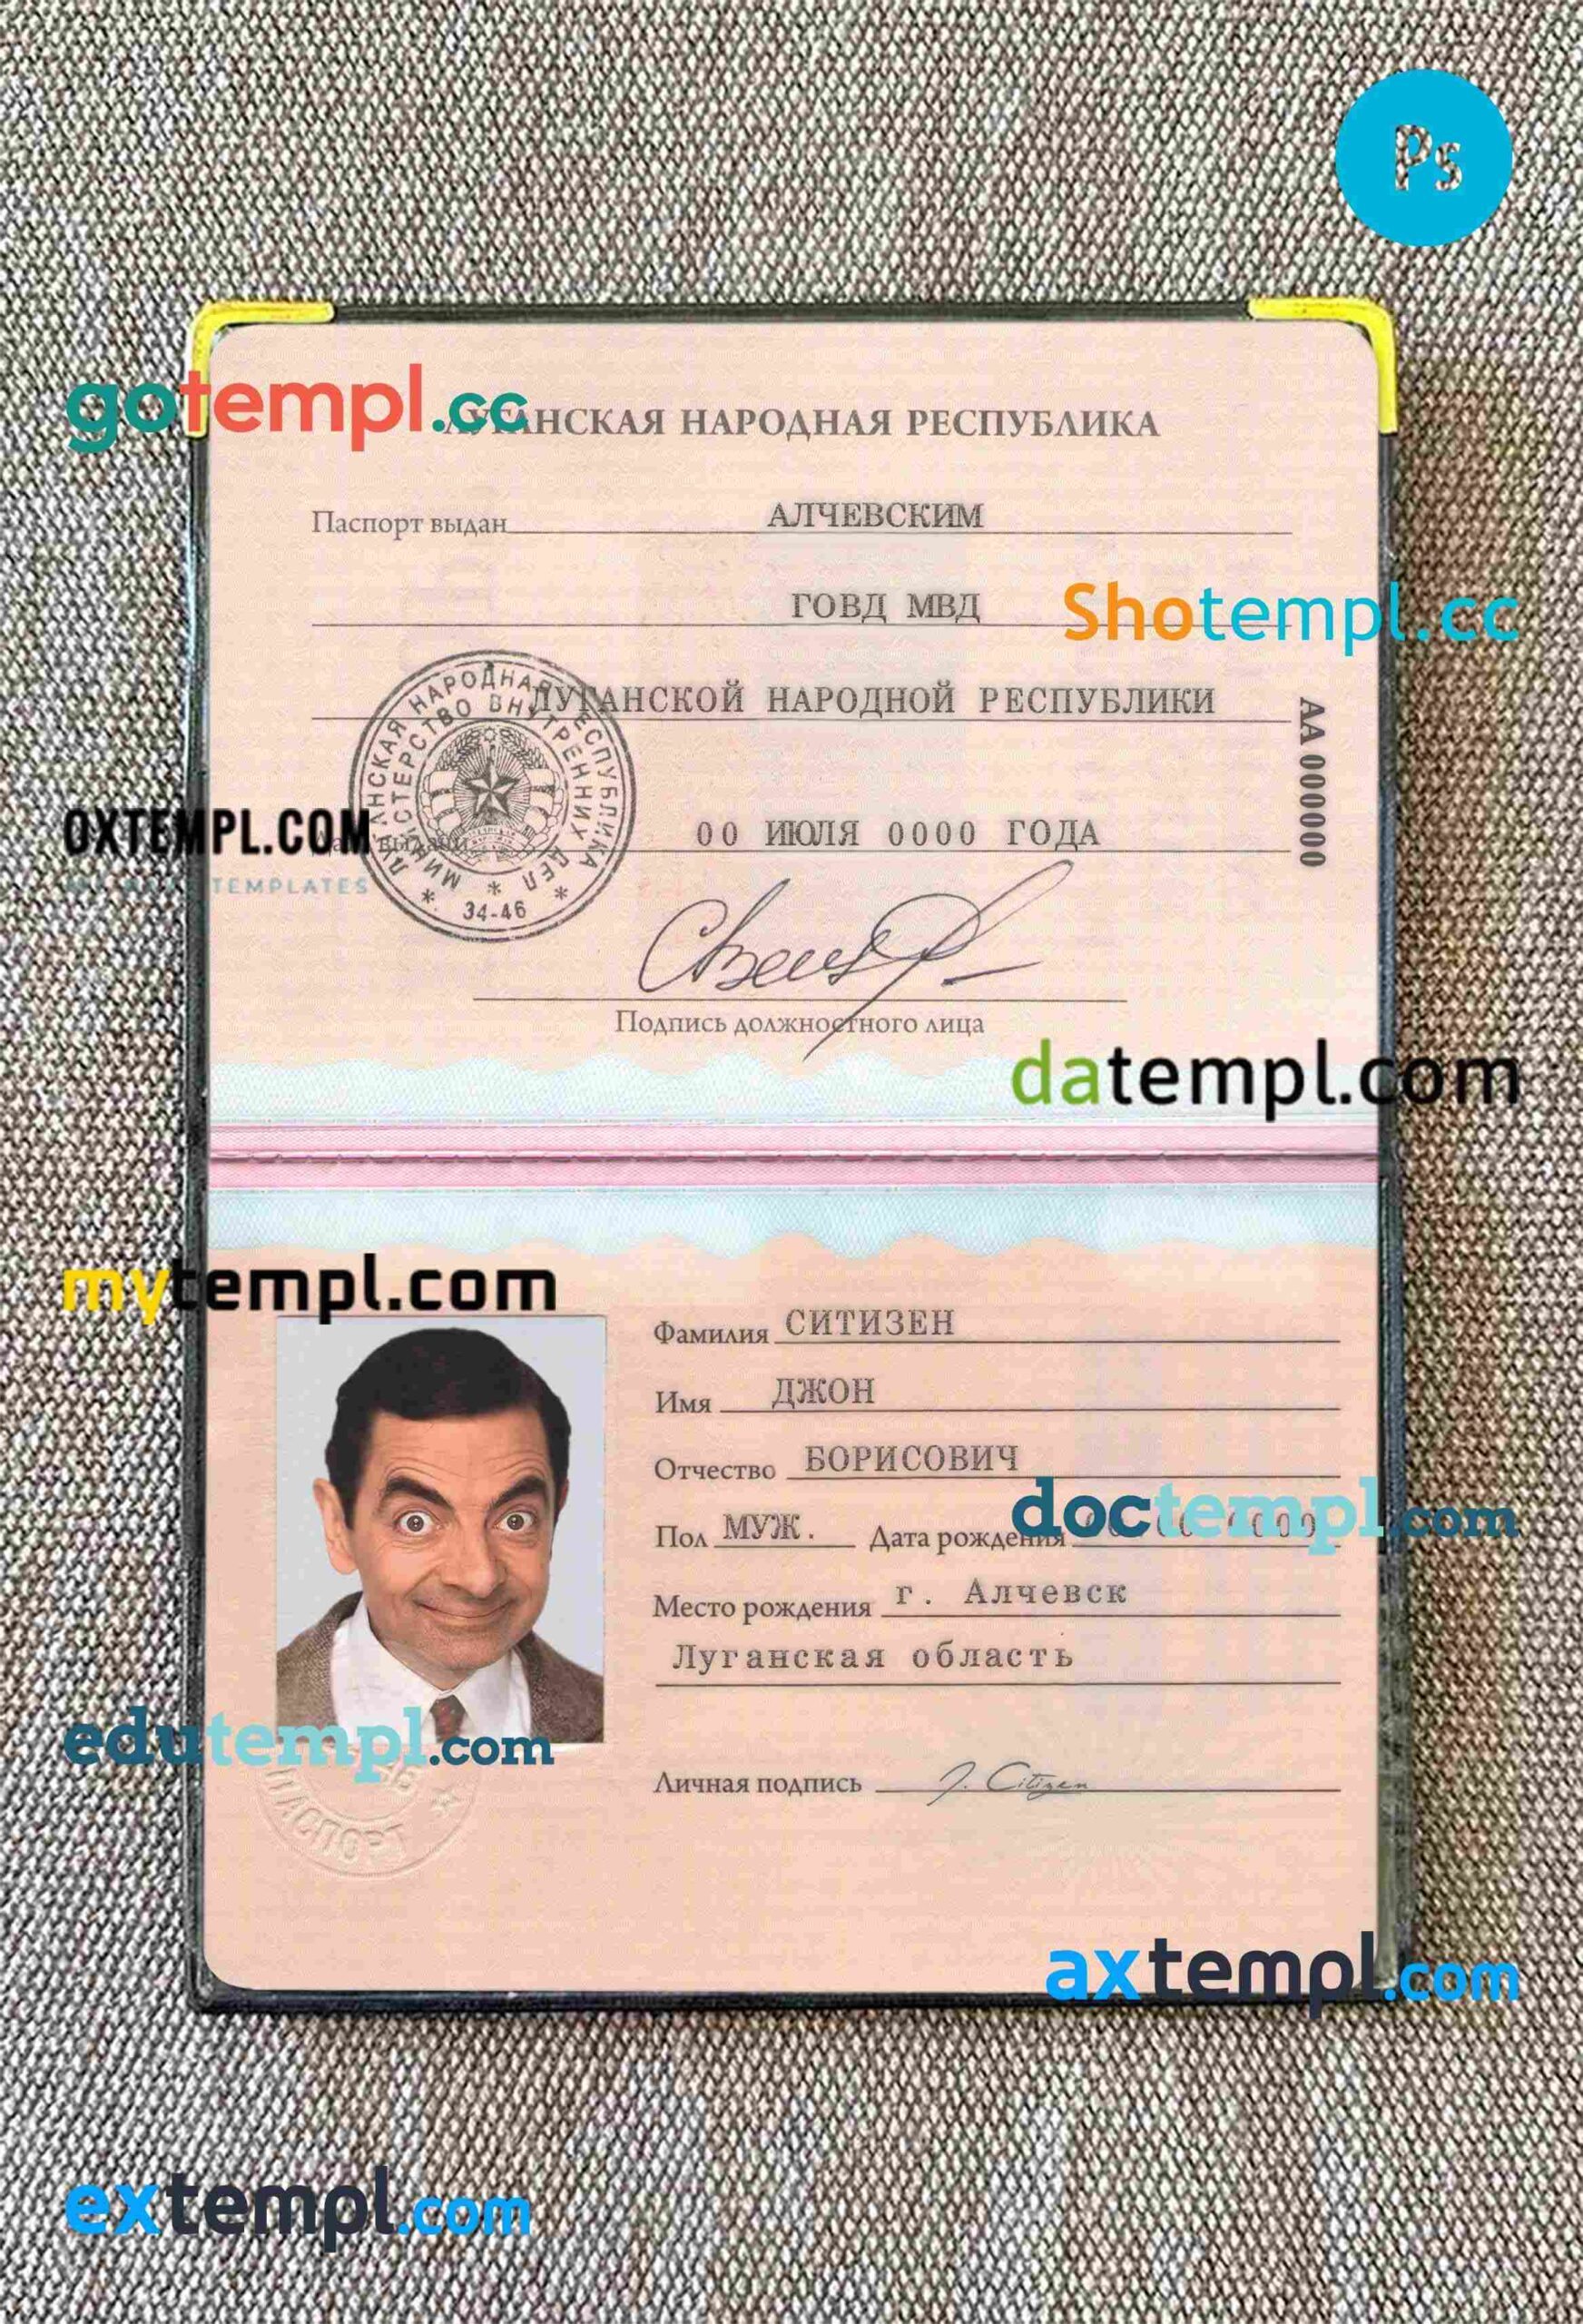 Luhansk People s republic passport PSD files, scan and photograghed image, 2 in 1